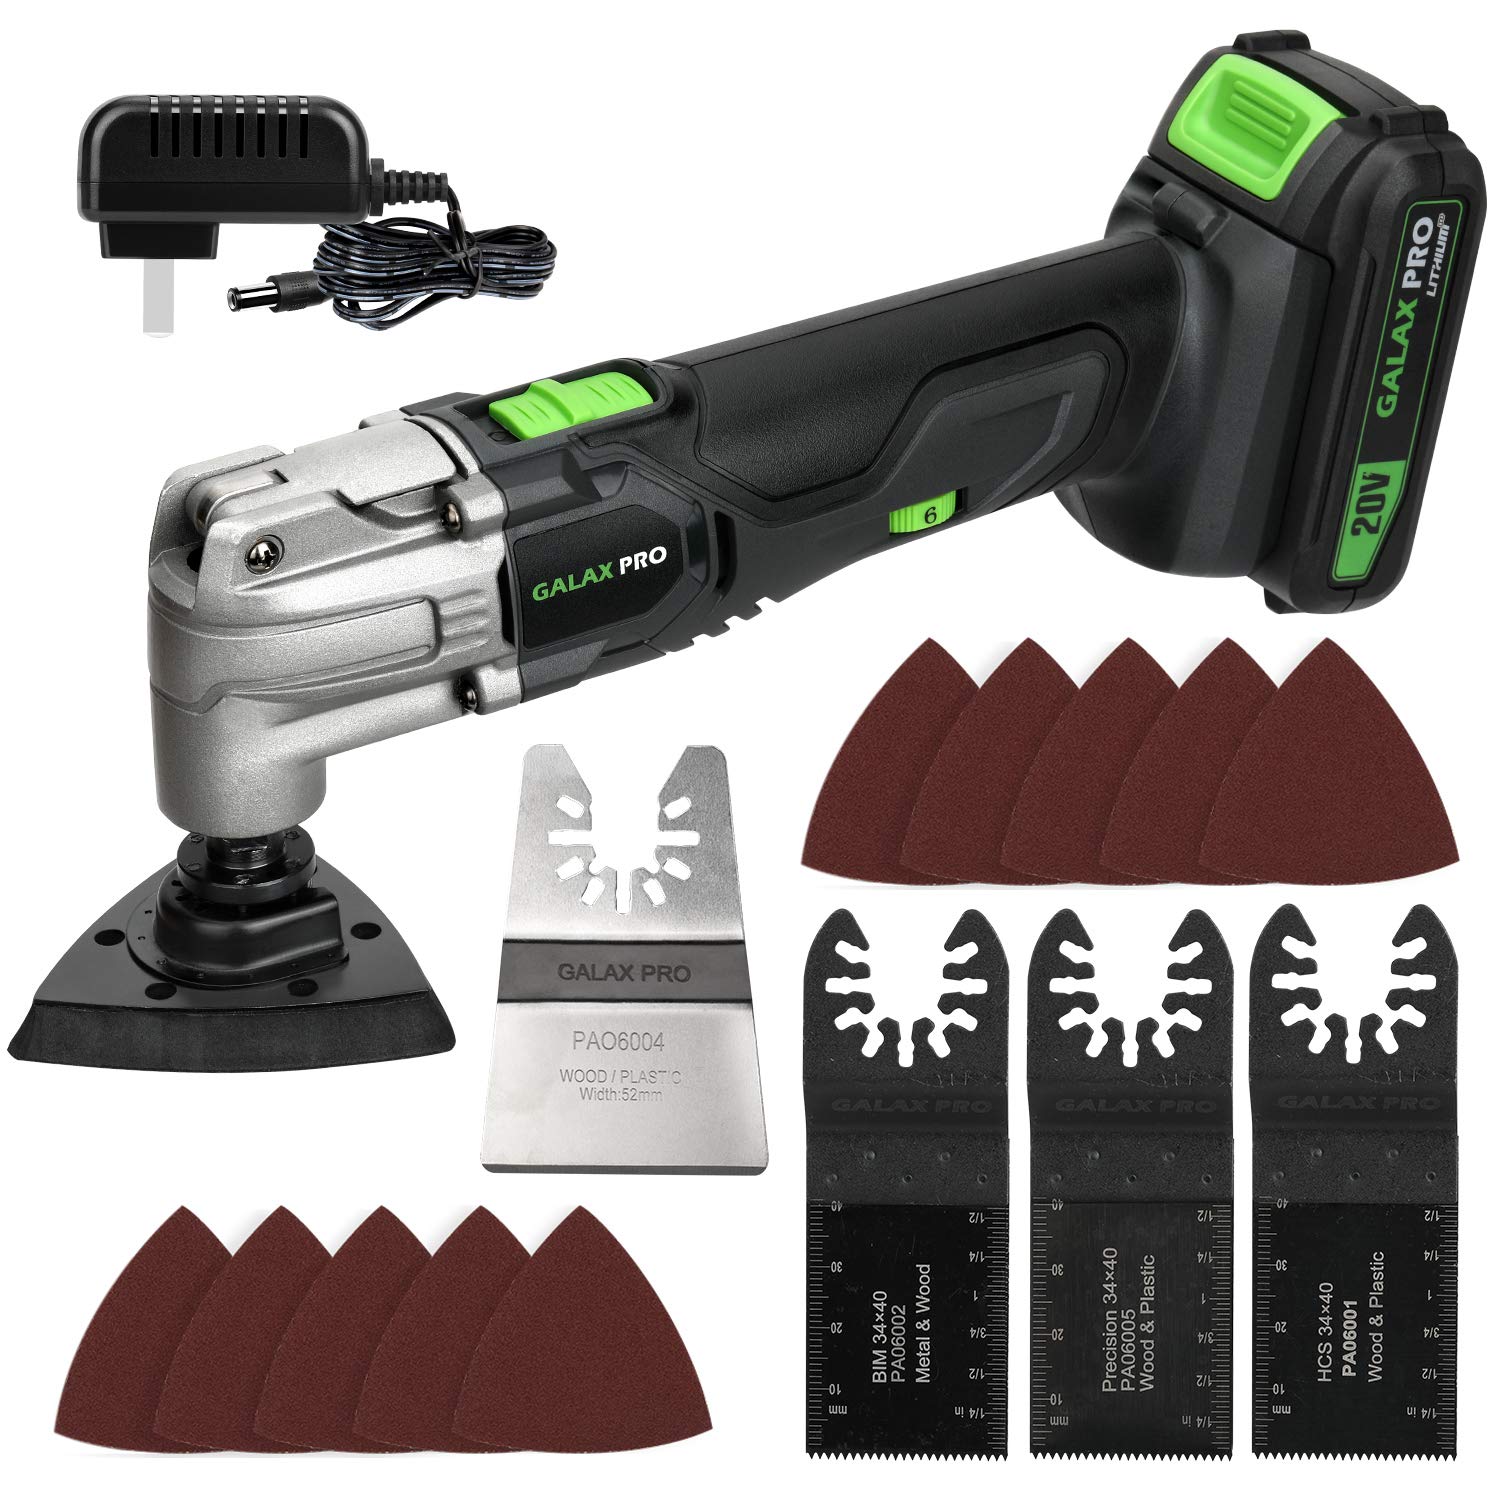 GALAX PRO Oscillating Tool 20V Lithium Ion Cordless Oscillating Multi Tool with 1.3Ah Battery and Charger 3pcs Blade and 10